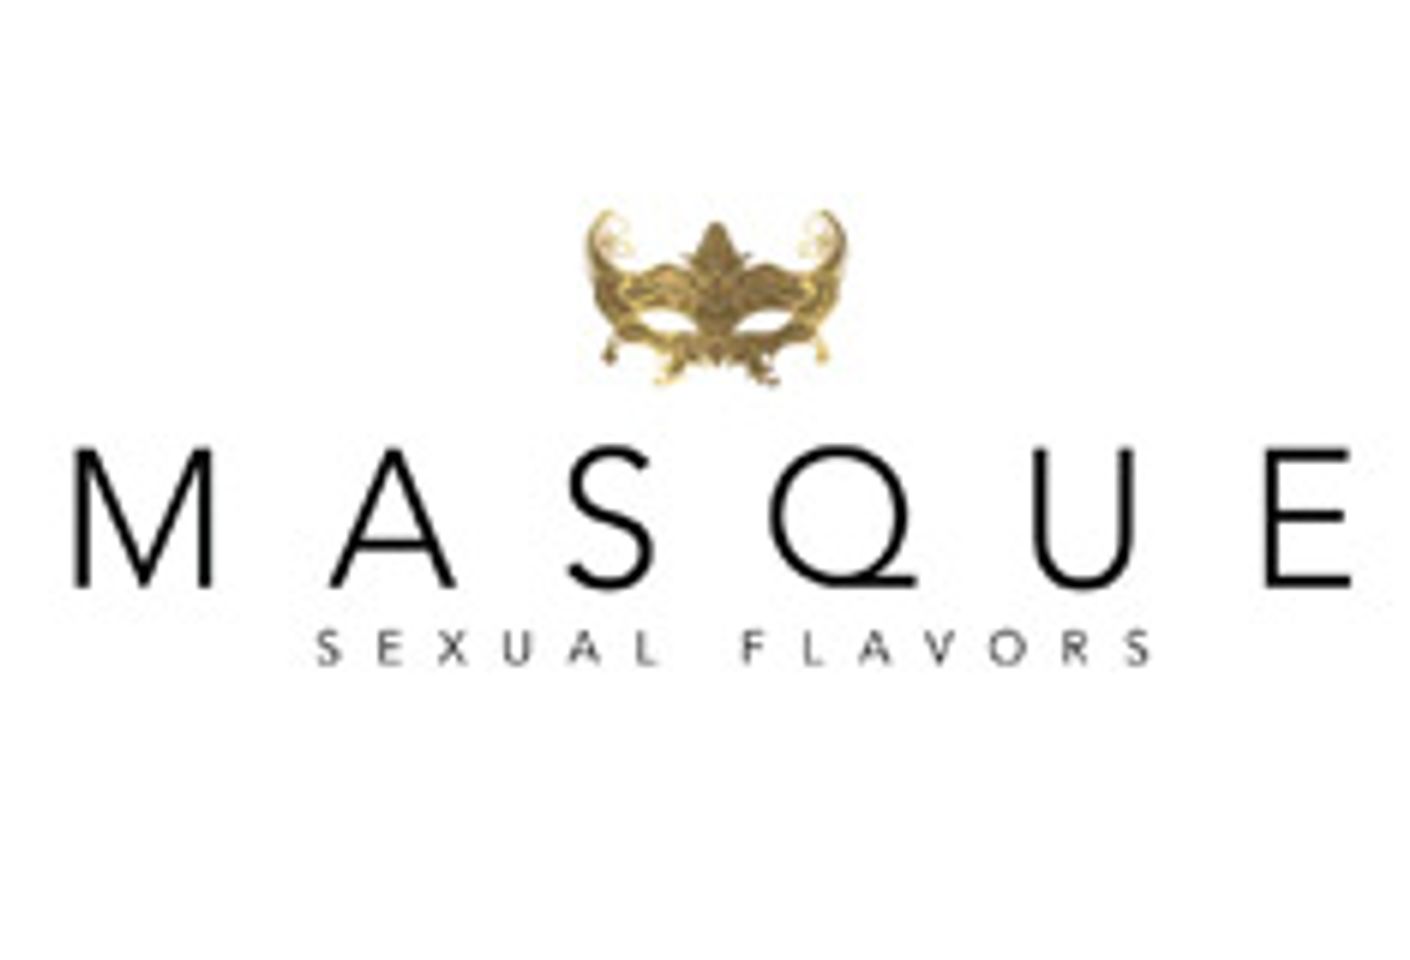 Masque Sexual Flavors Helps Couples During National Romance Month